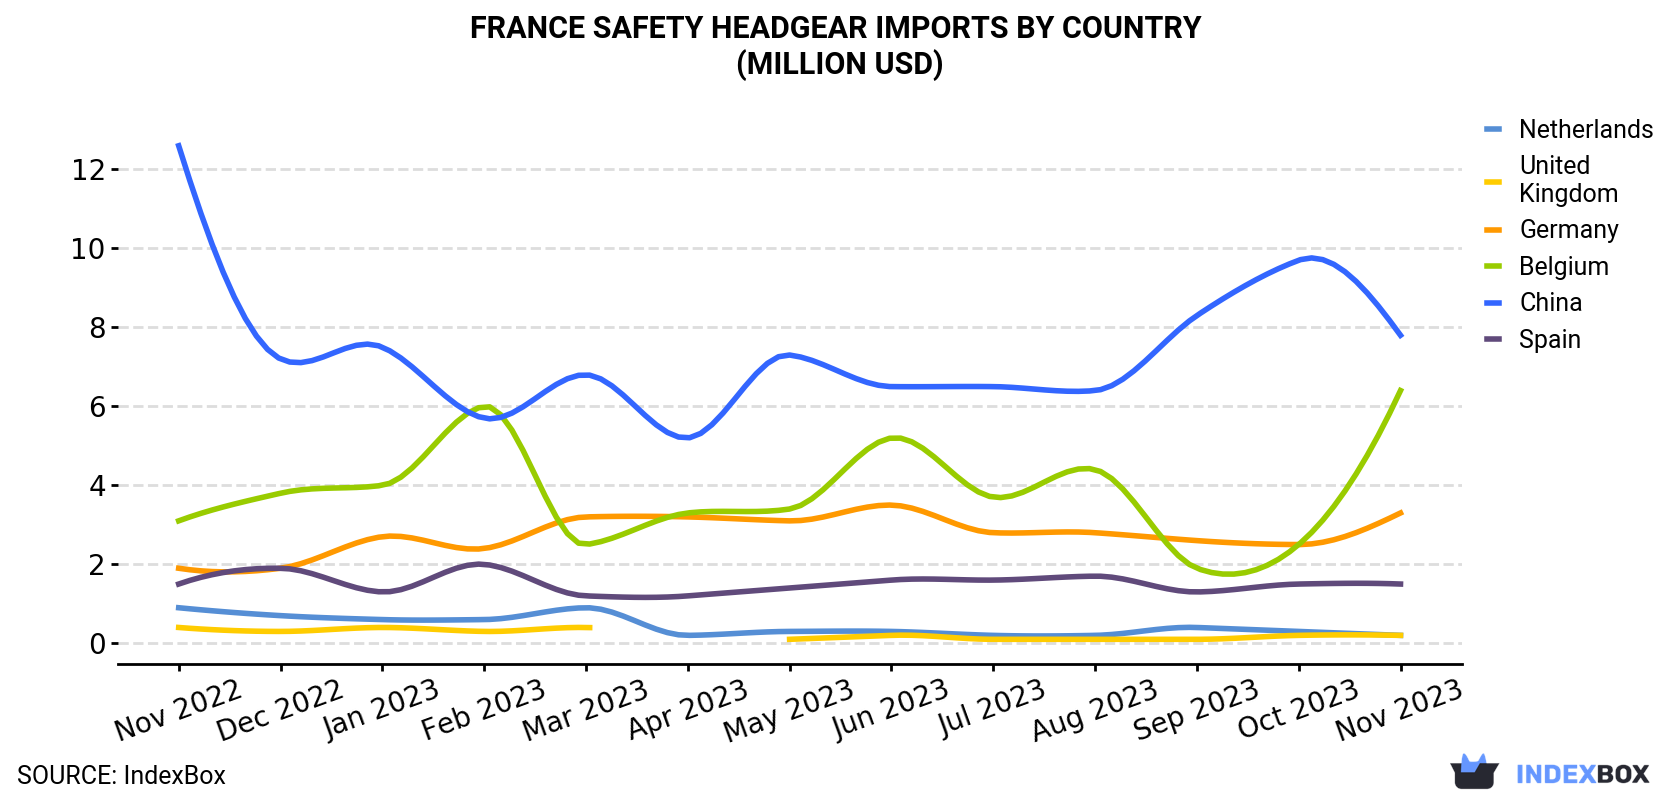 France Safety Headgear Imports By Country (Million USD)